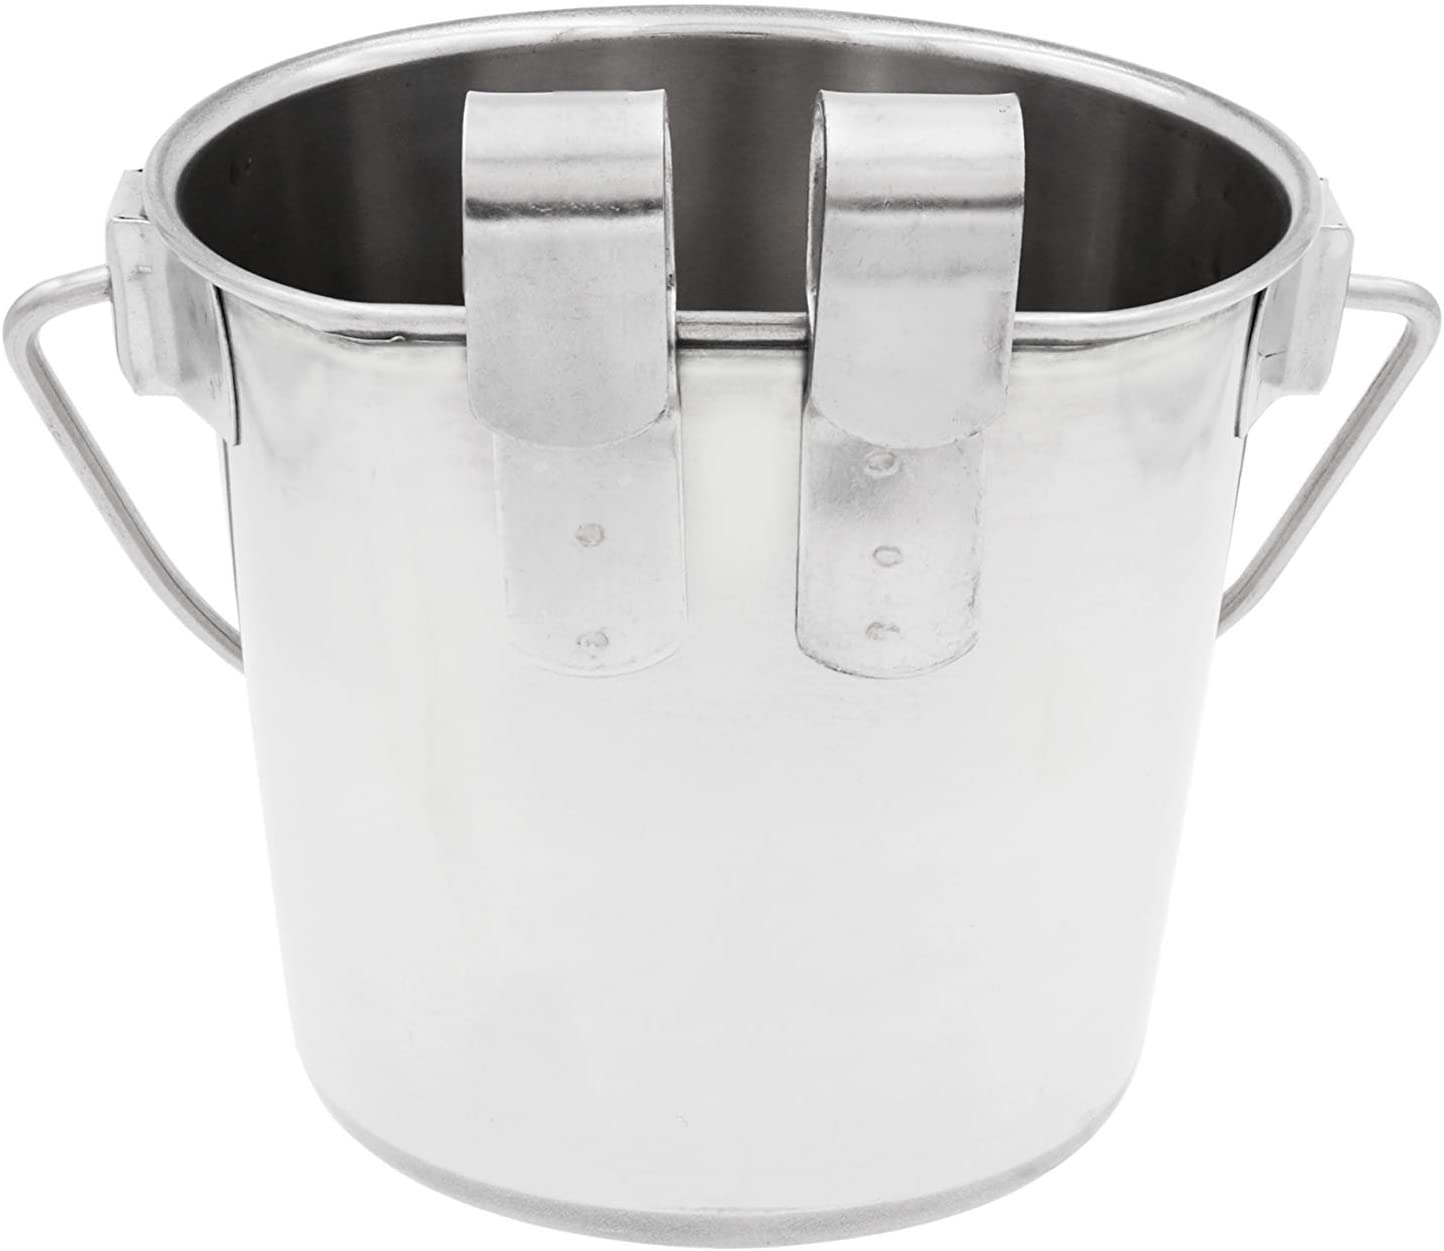 Fuzzy Puppy Flat Sided Pail with Dual Hooks, Snugly Fit on Dog, Cat and Critter Crates & Cages, Heavy Duty Stainless Steel